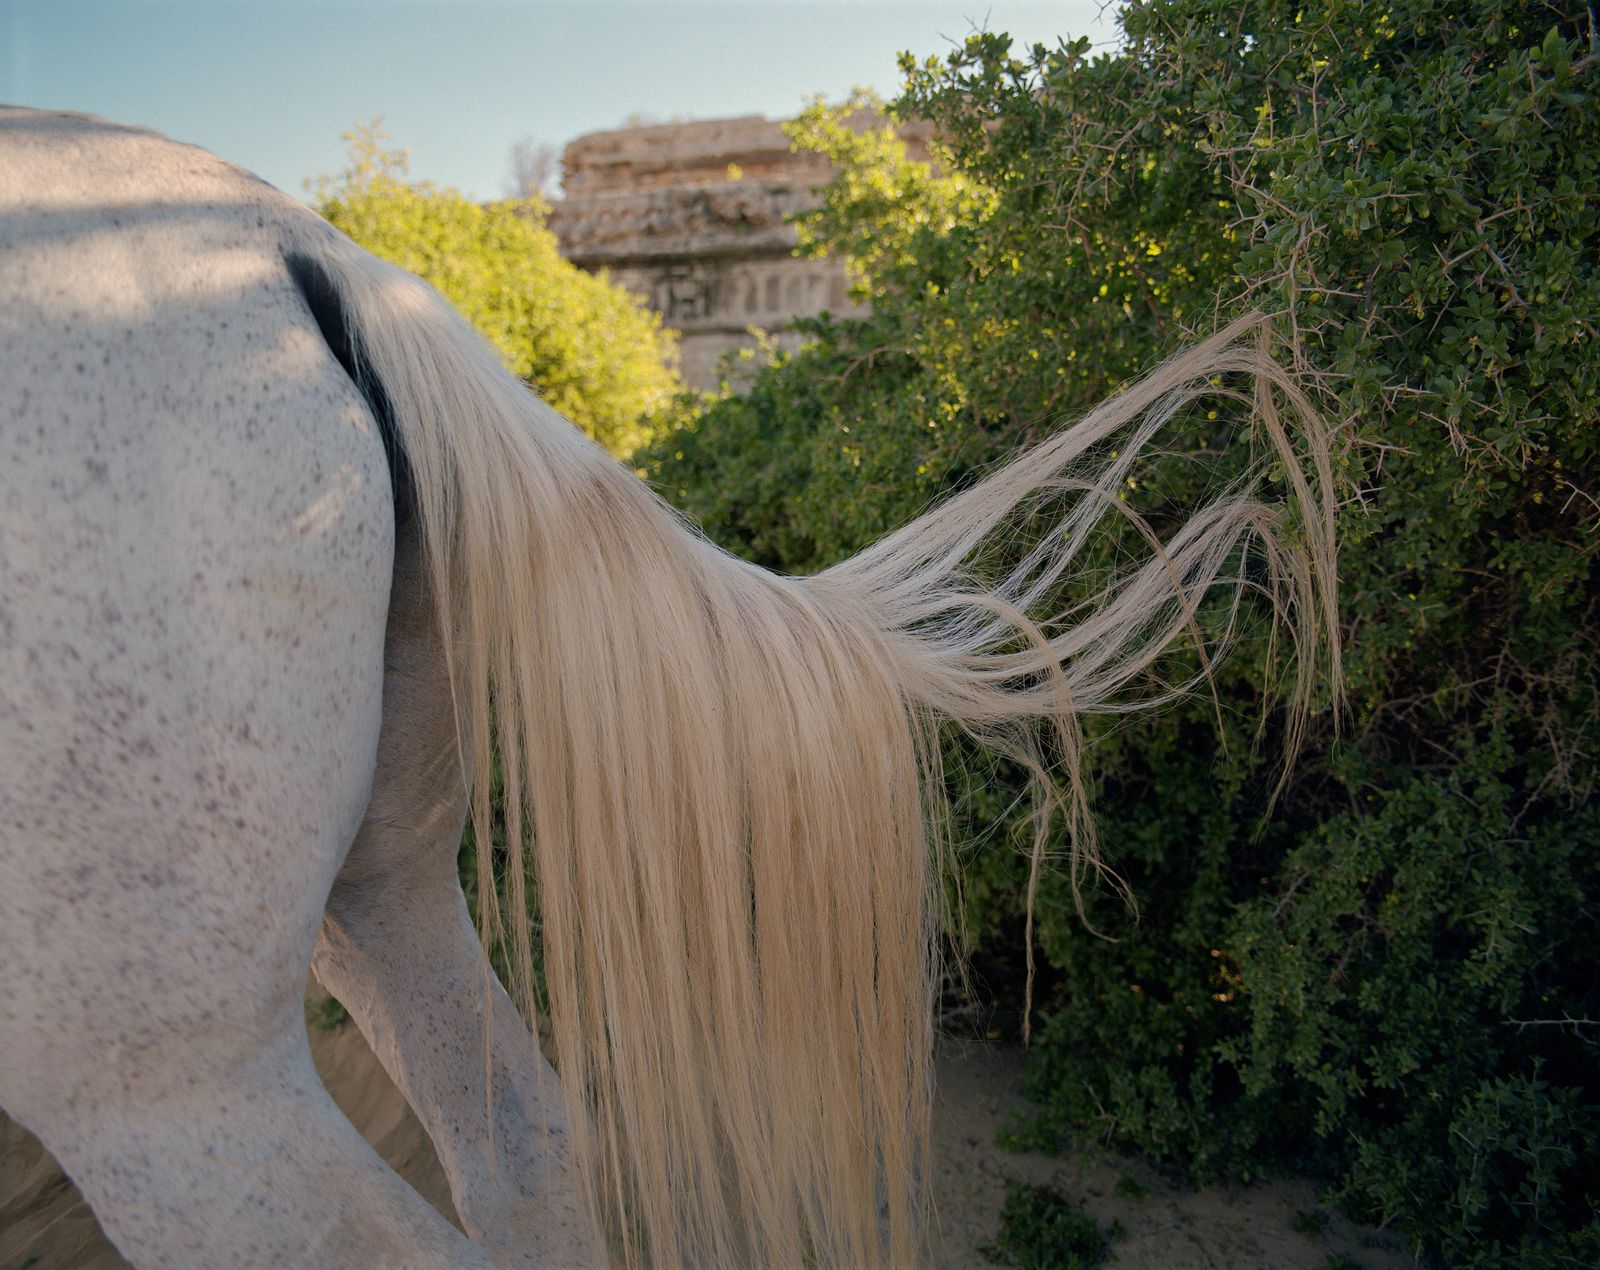 © Sophie Ebrard - Image from the They are not afraid of riding stallions photography project